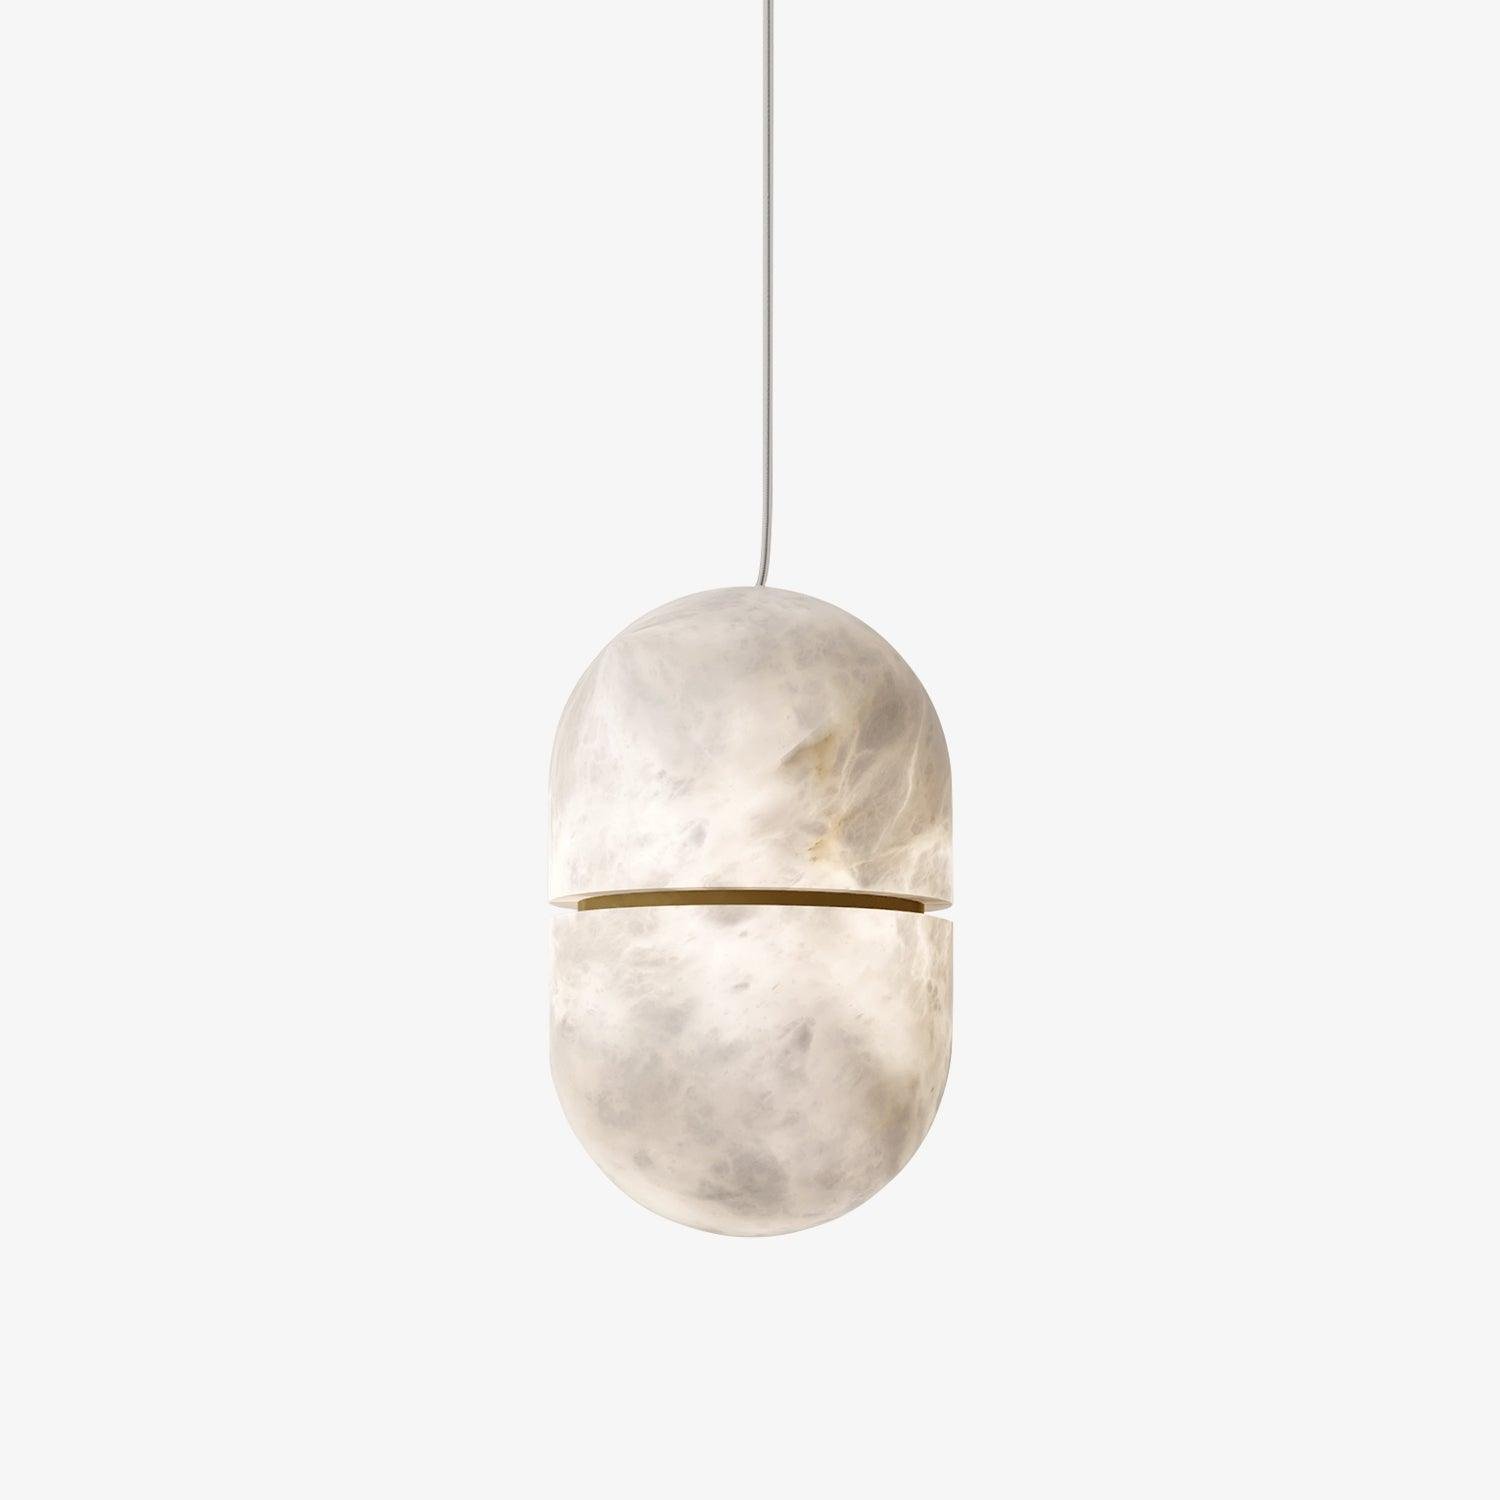 White YUM Pendant Light with a diameter of 7.1 inches and a height of 11.8 inches (or 18cm x 30cm).